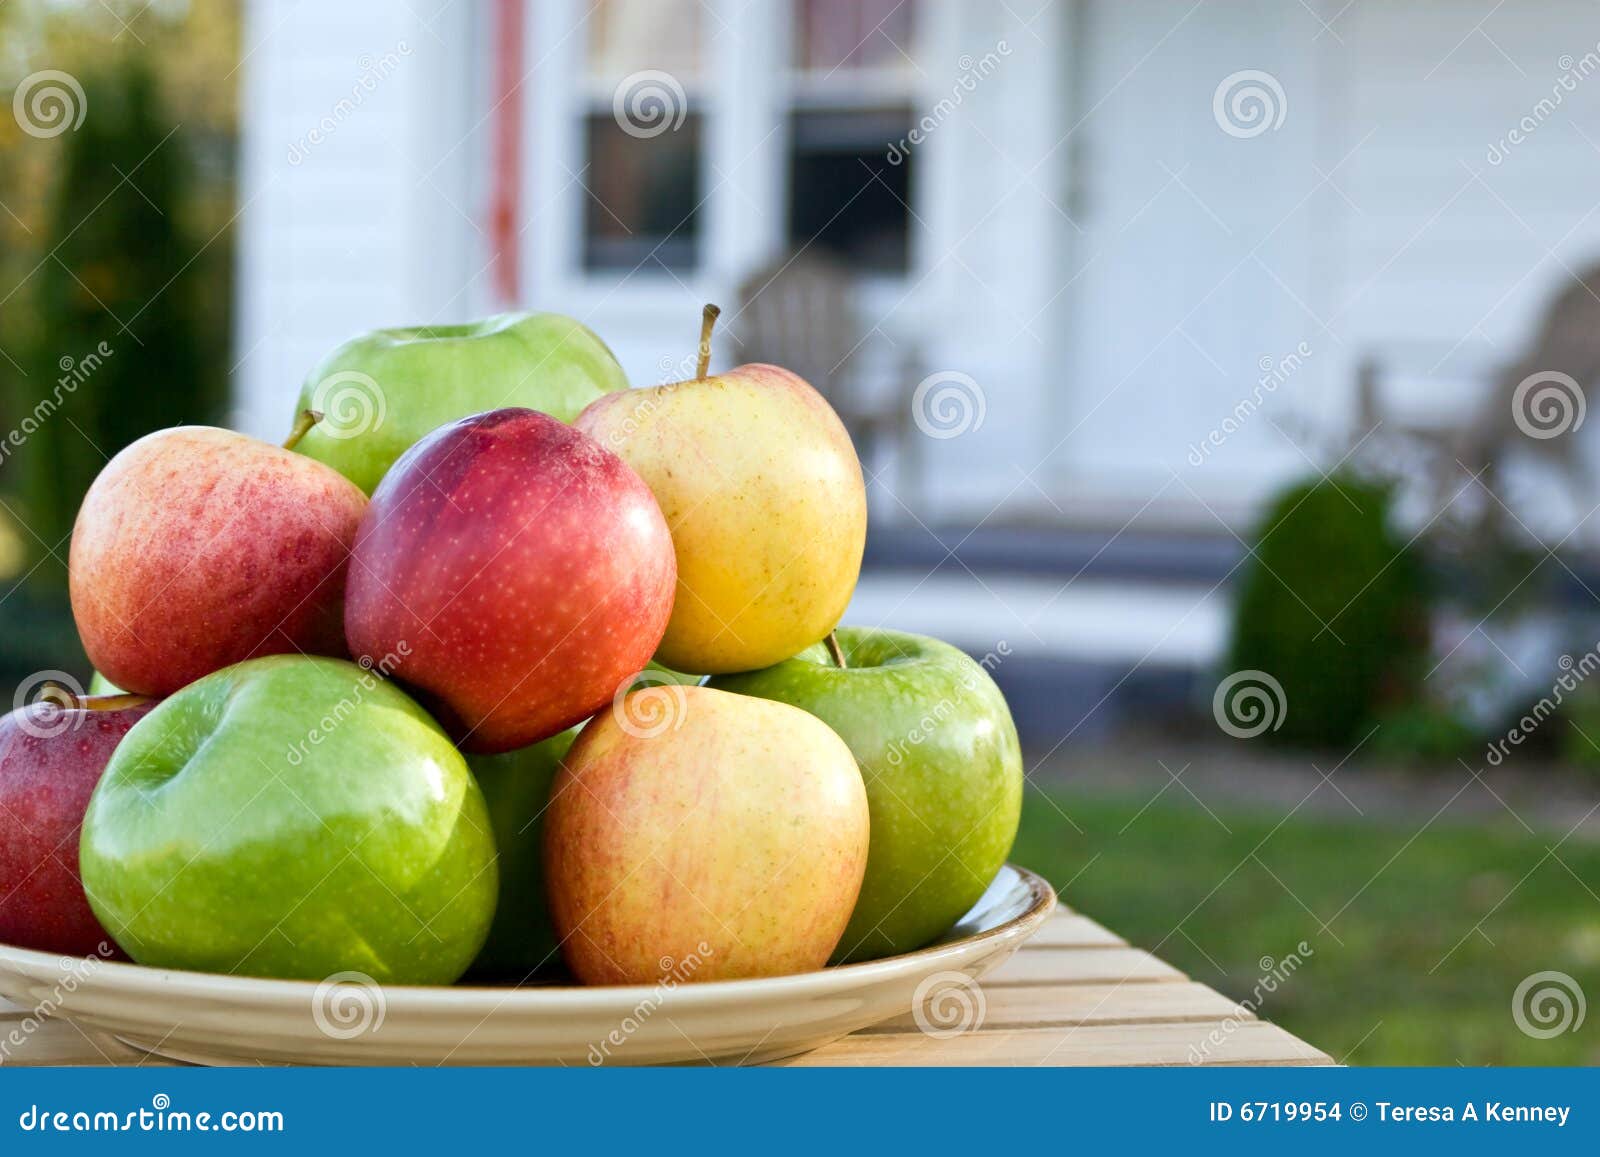 apples at home